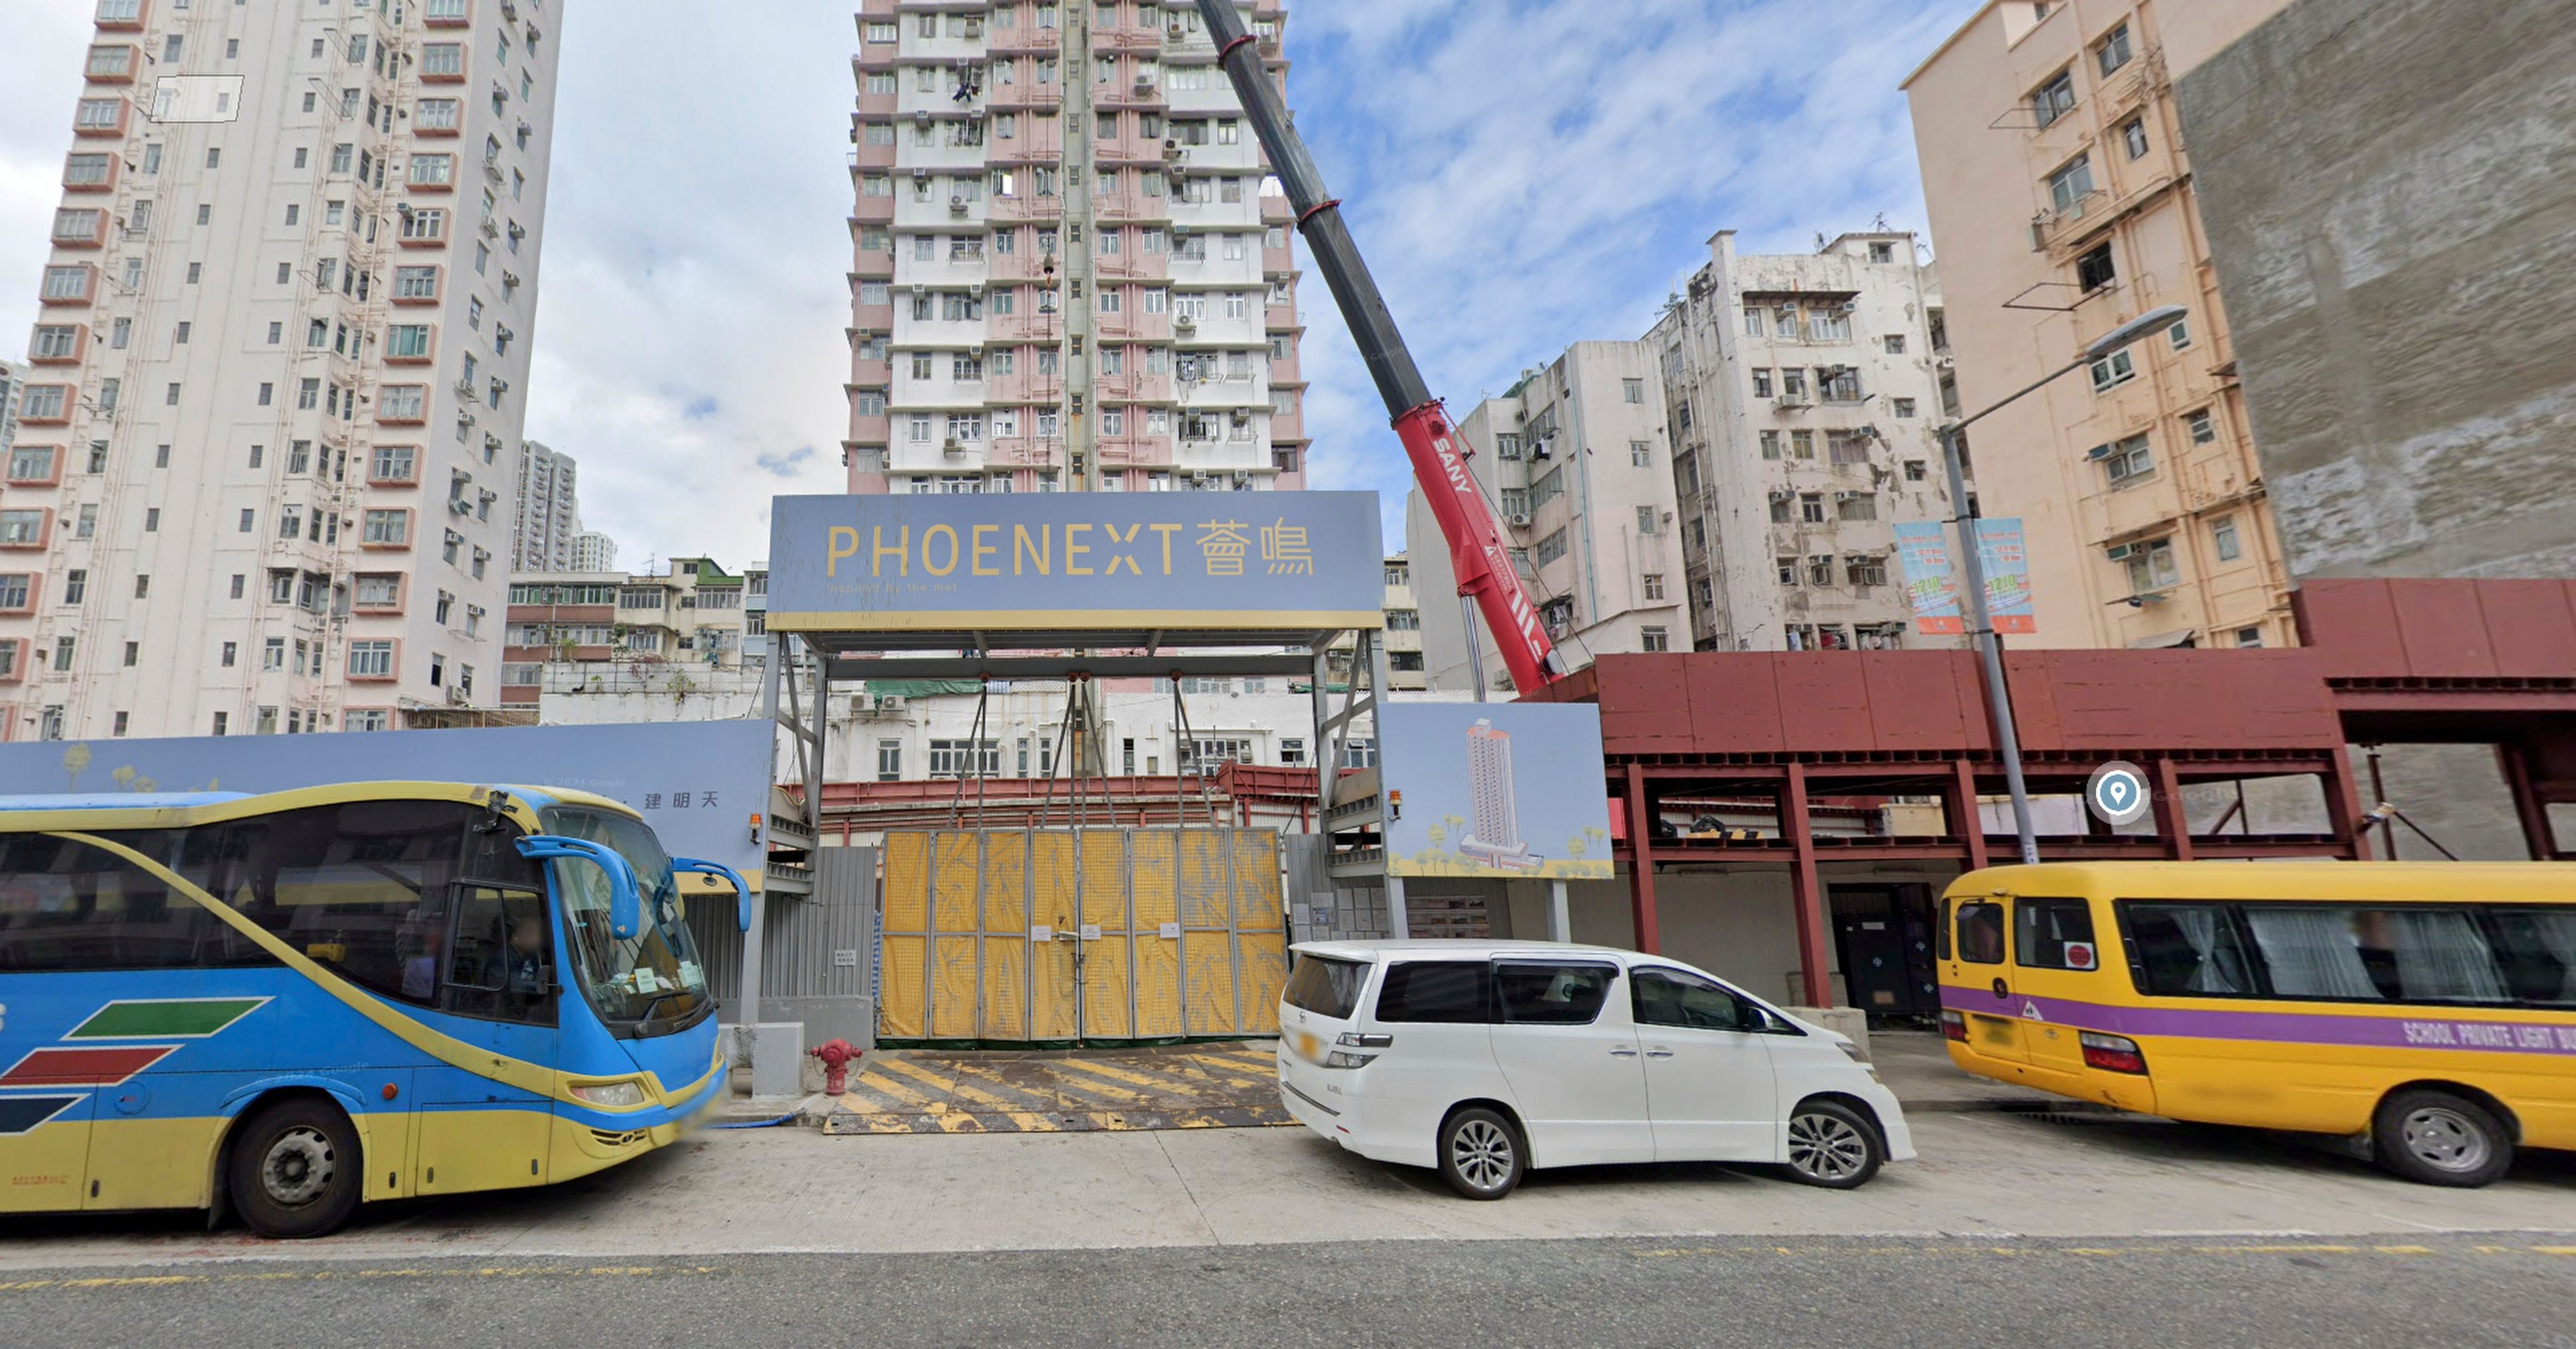 The site of Phoenext in Wong Tai Sin. Photo: Google